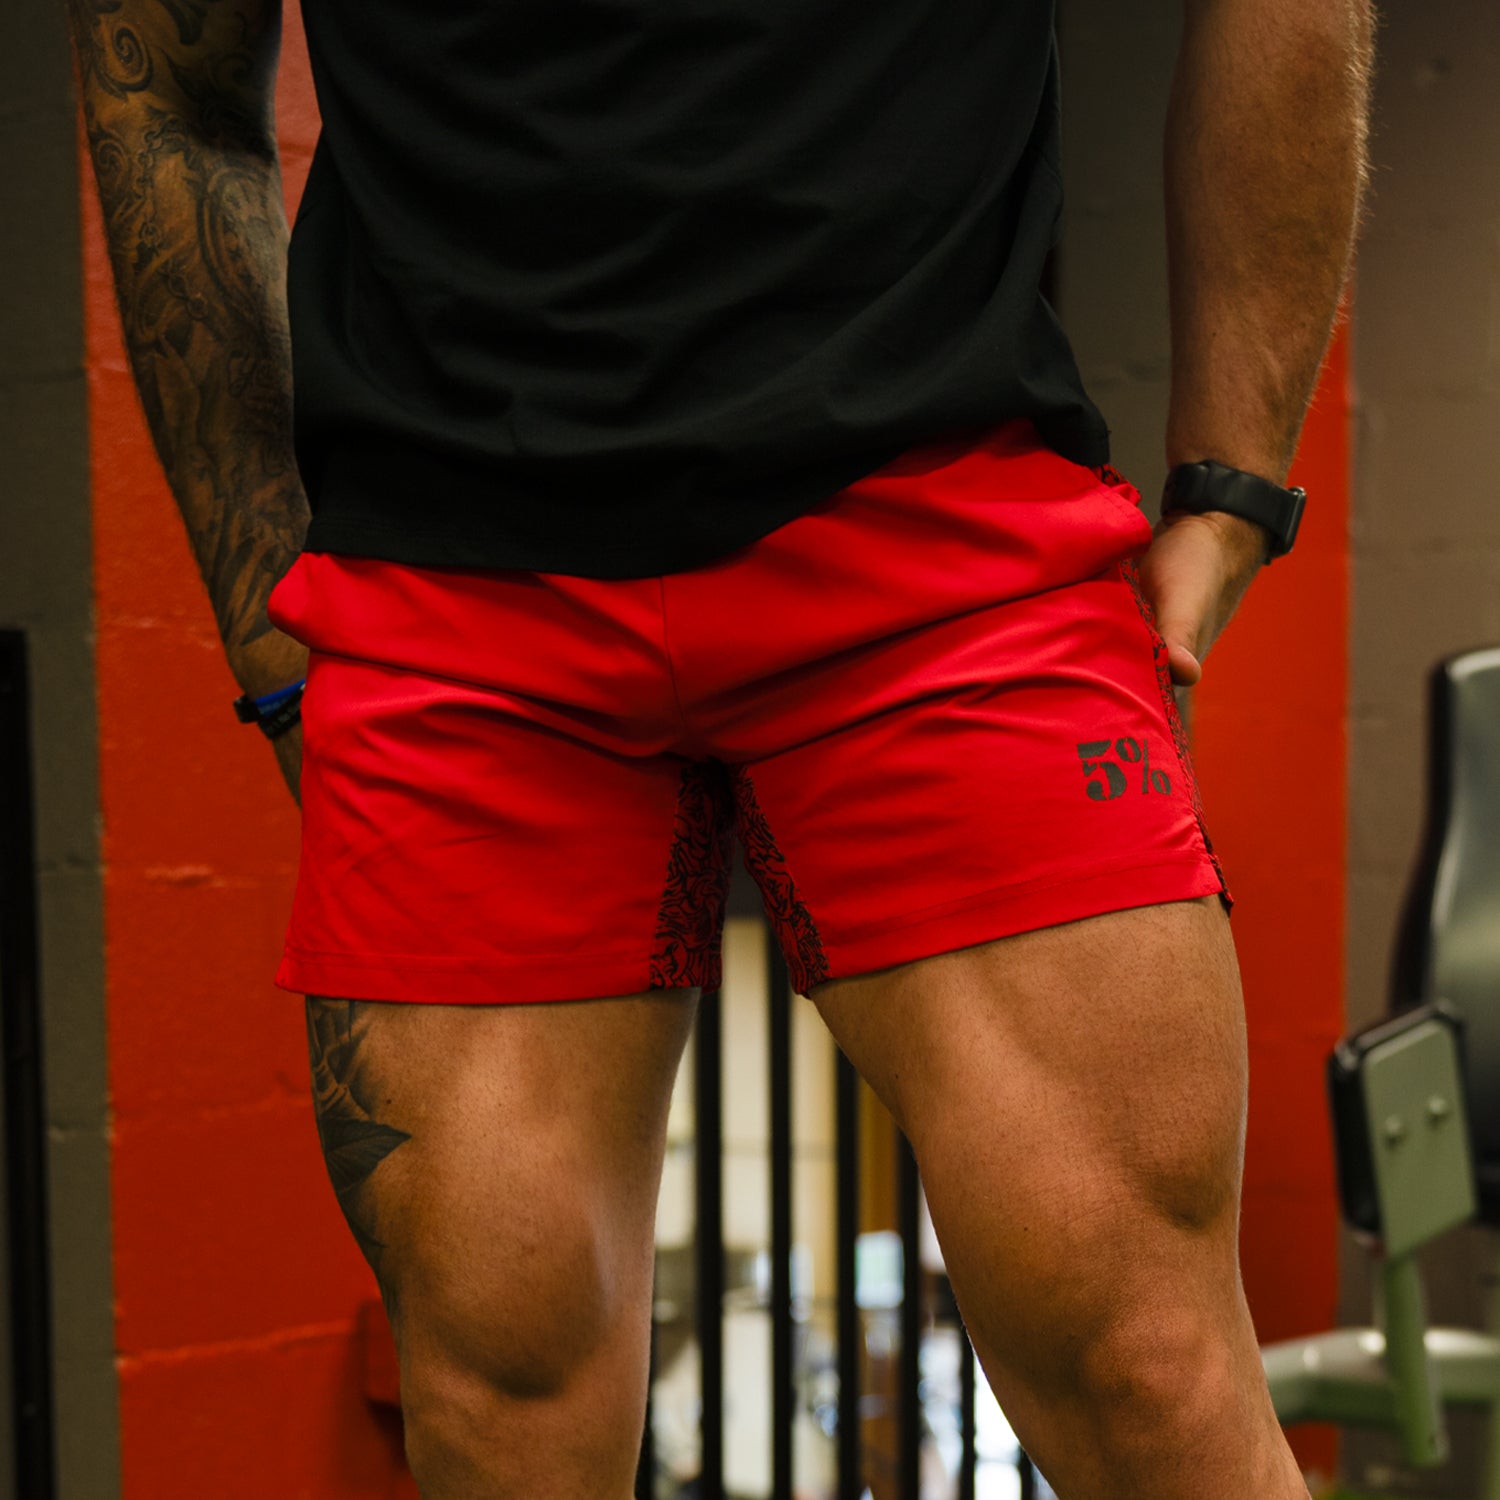 5% Red Lifting Shorts - 5% Nutrition